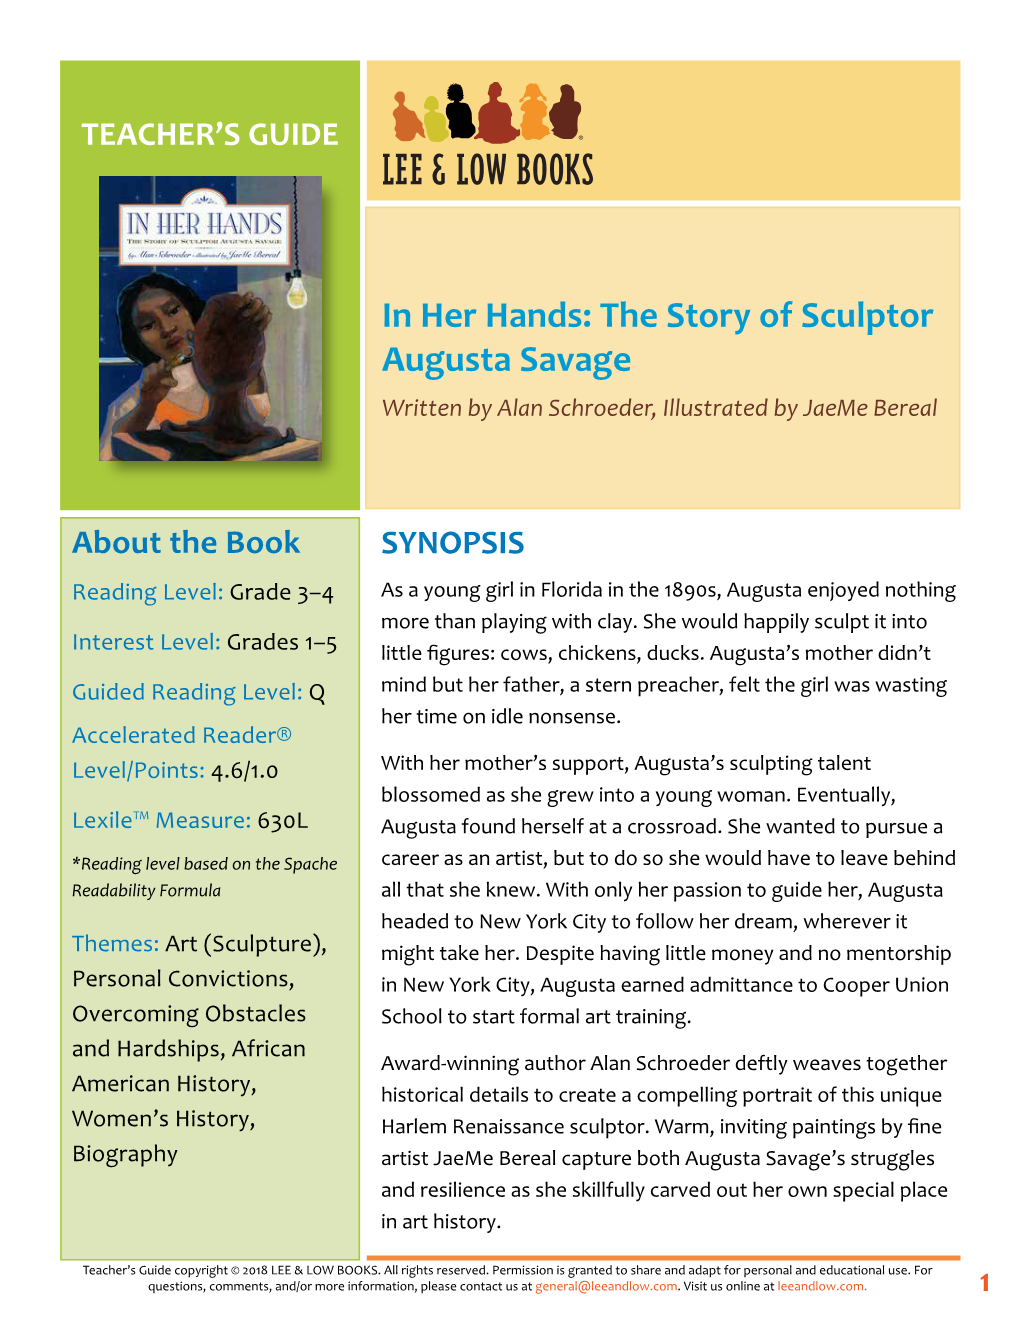 In Her Hands: the Story of Sculptor Augusta Savage Written by Alan Schroeder, Illustrated by Jaeme Bereal